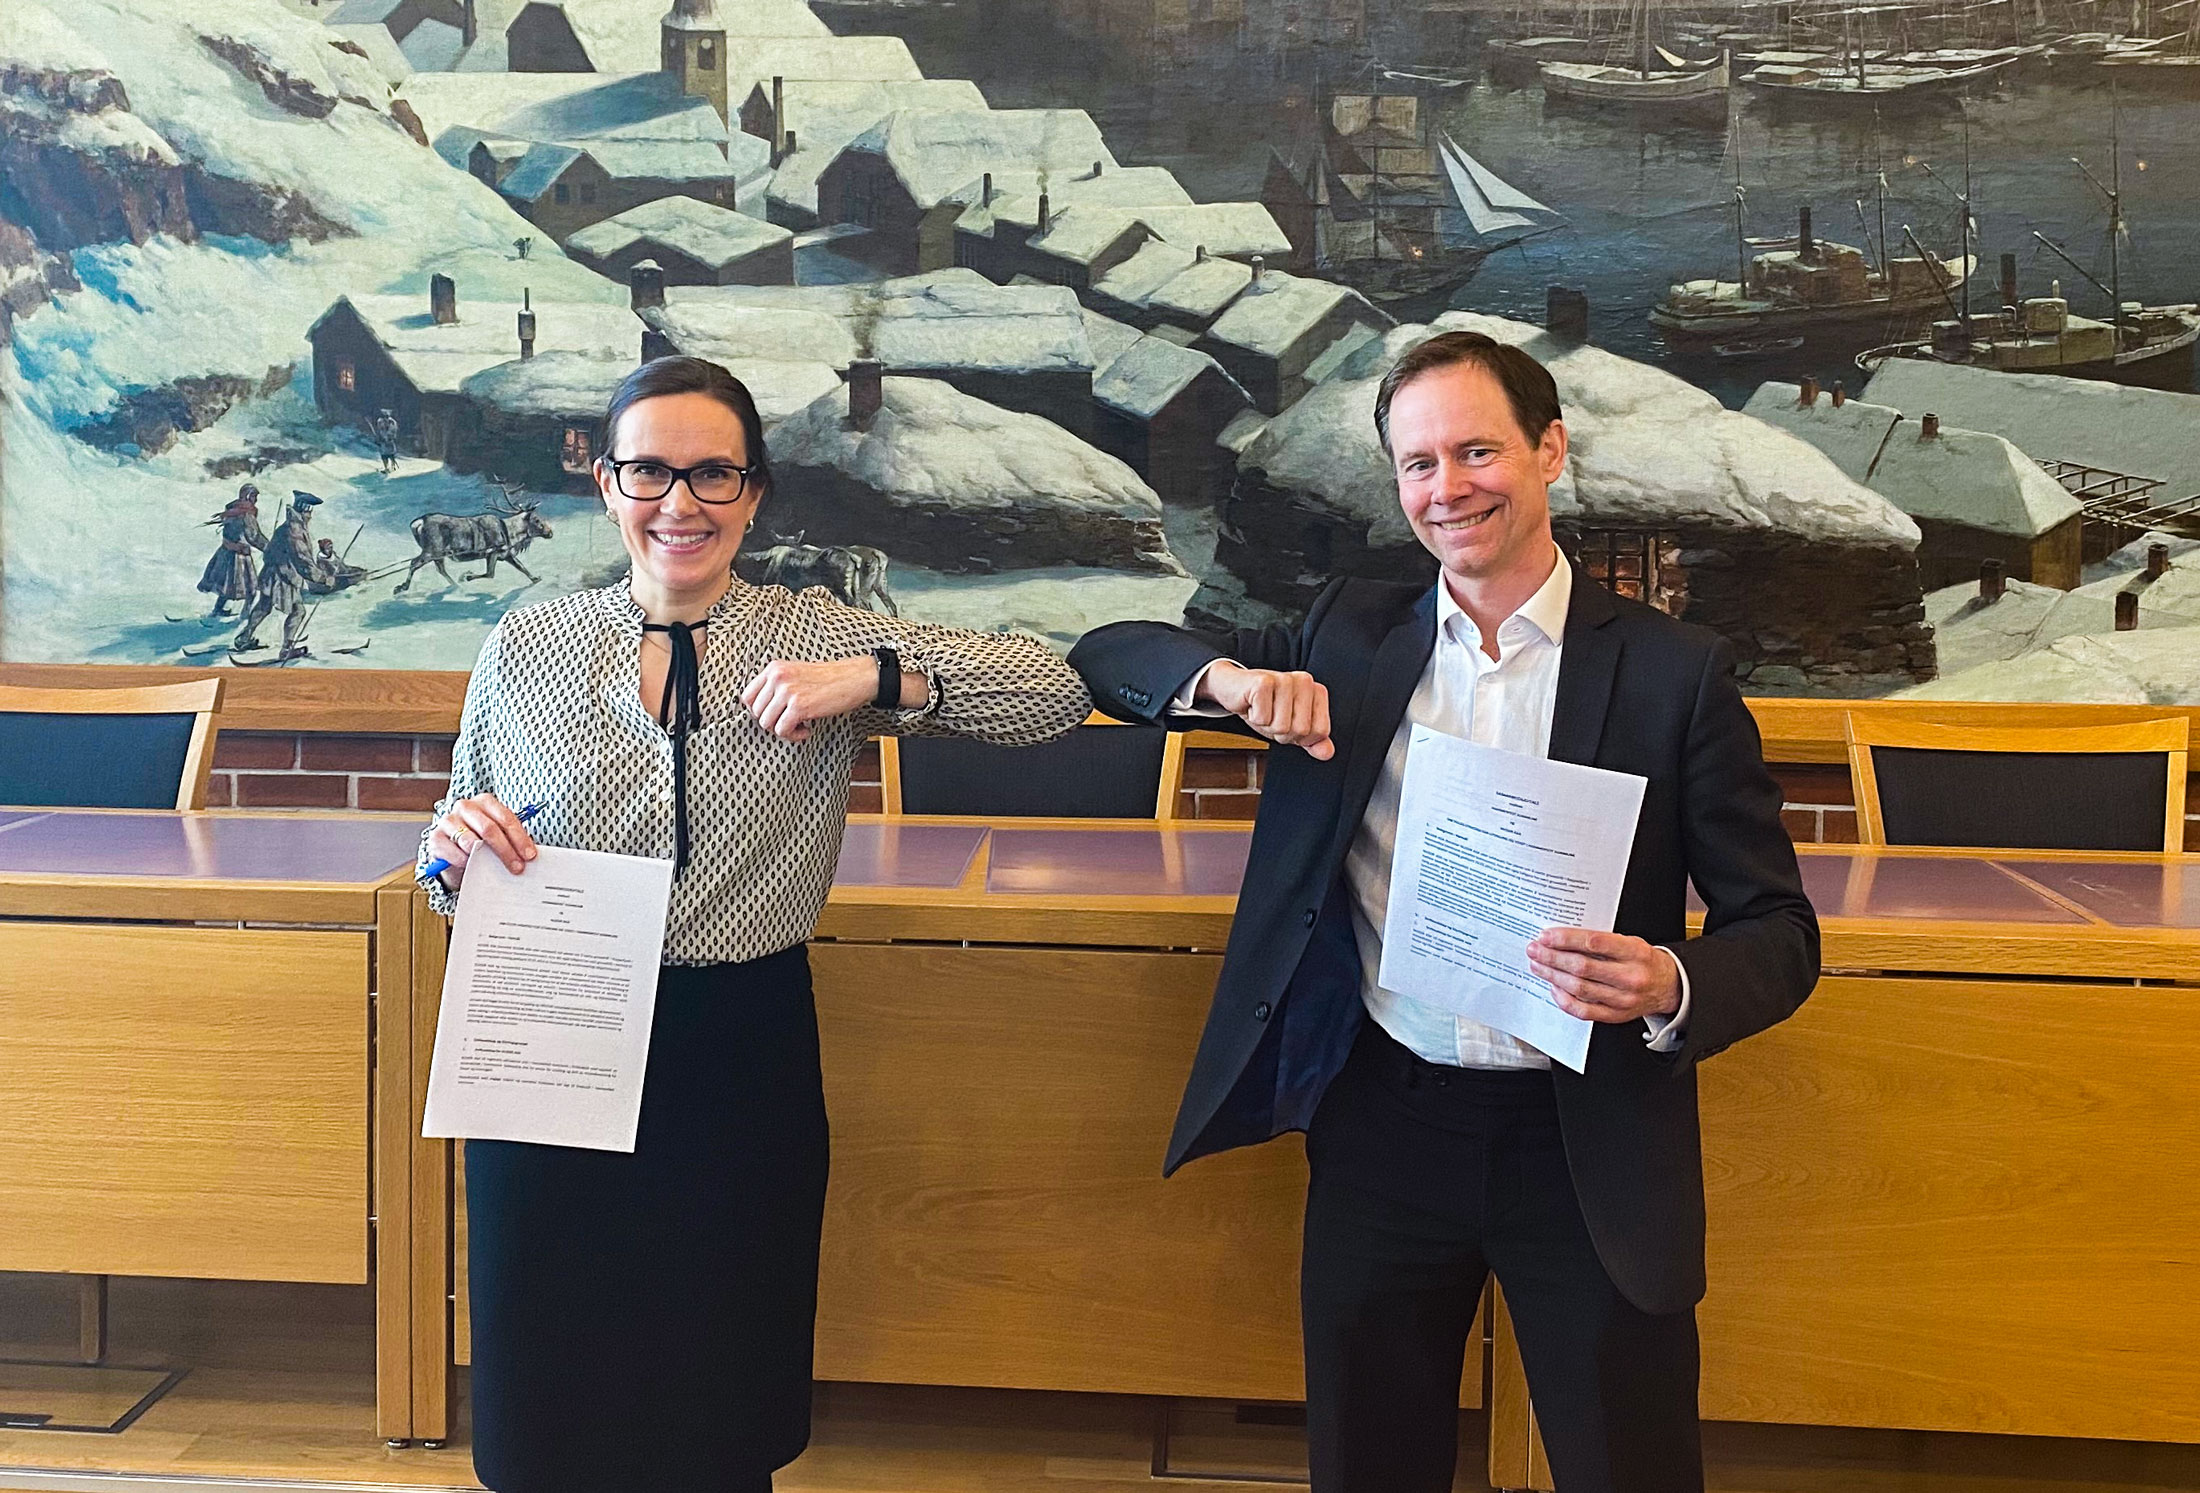 Øystein Rushfeldt, CEO of Nussir ASA, and Marianne Sivertsen Næss, Mayor of Hammerfest Municipality, signing the Cooperation Agreement